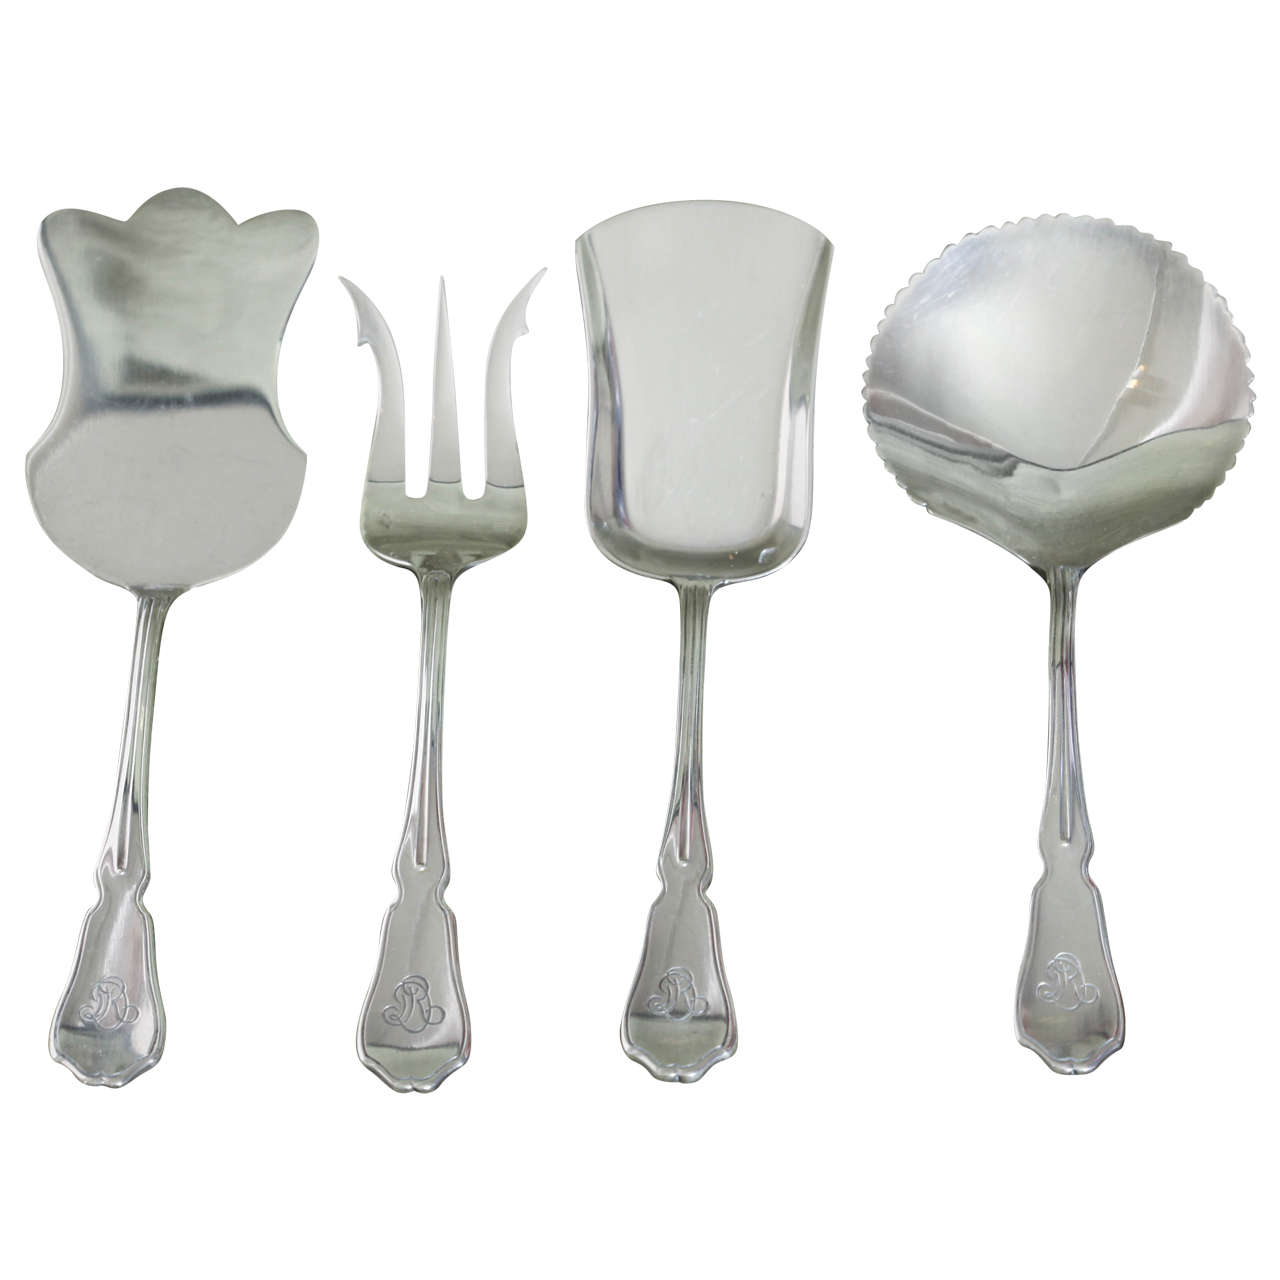 G. Keller Four-Piece Sterling Silver Hors D'oeuvres Set in Fitted Box For Sale